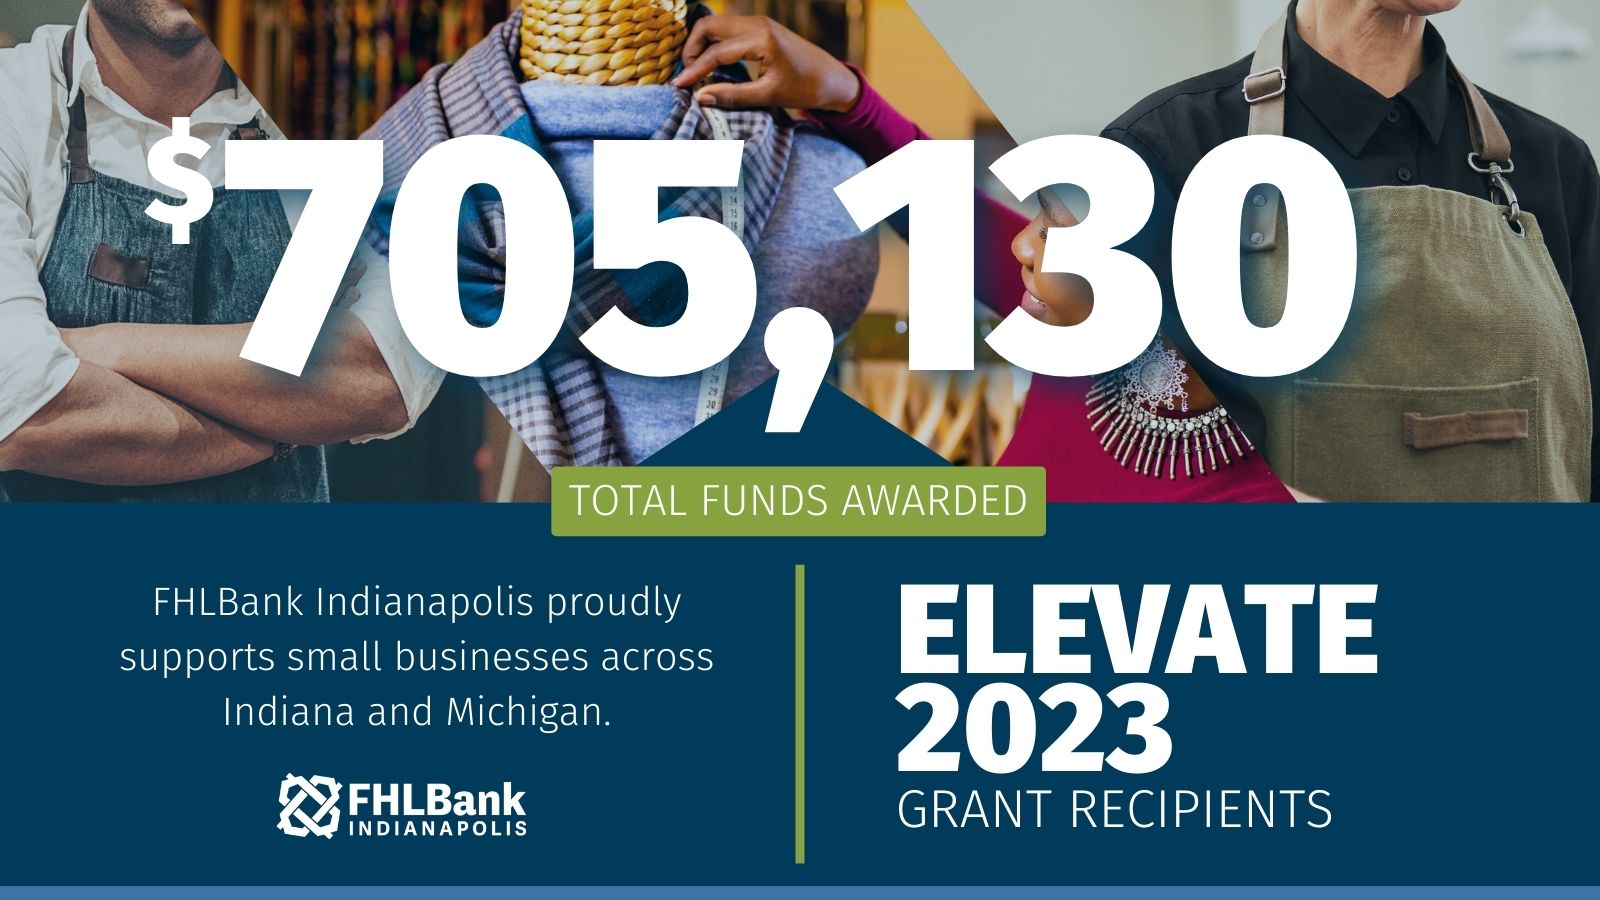 FHLBank Indianapolis awards more than $700,000 in Elevate Small Business Grants